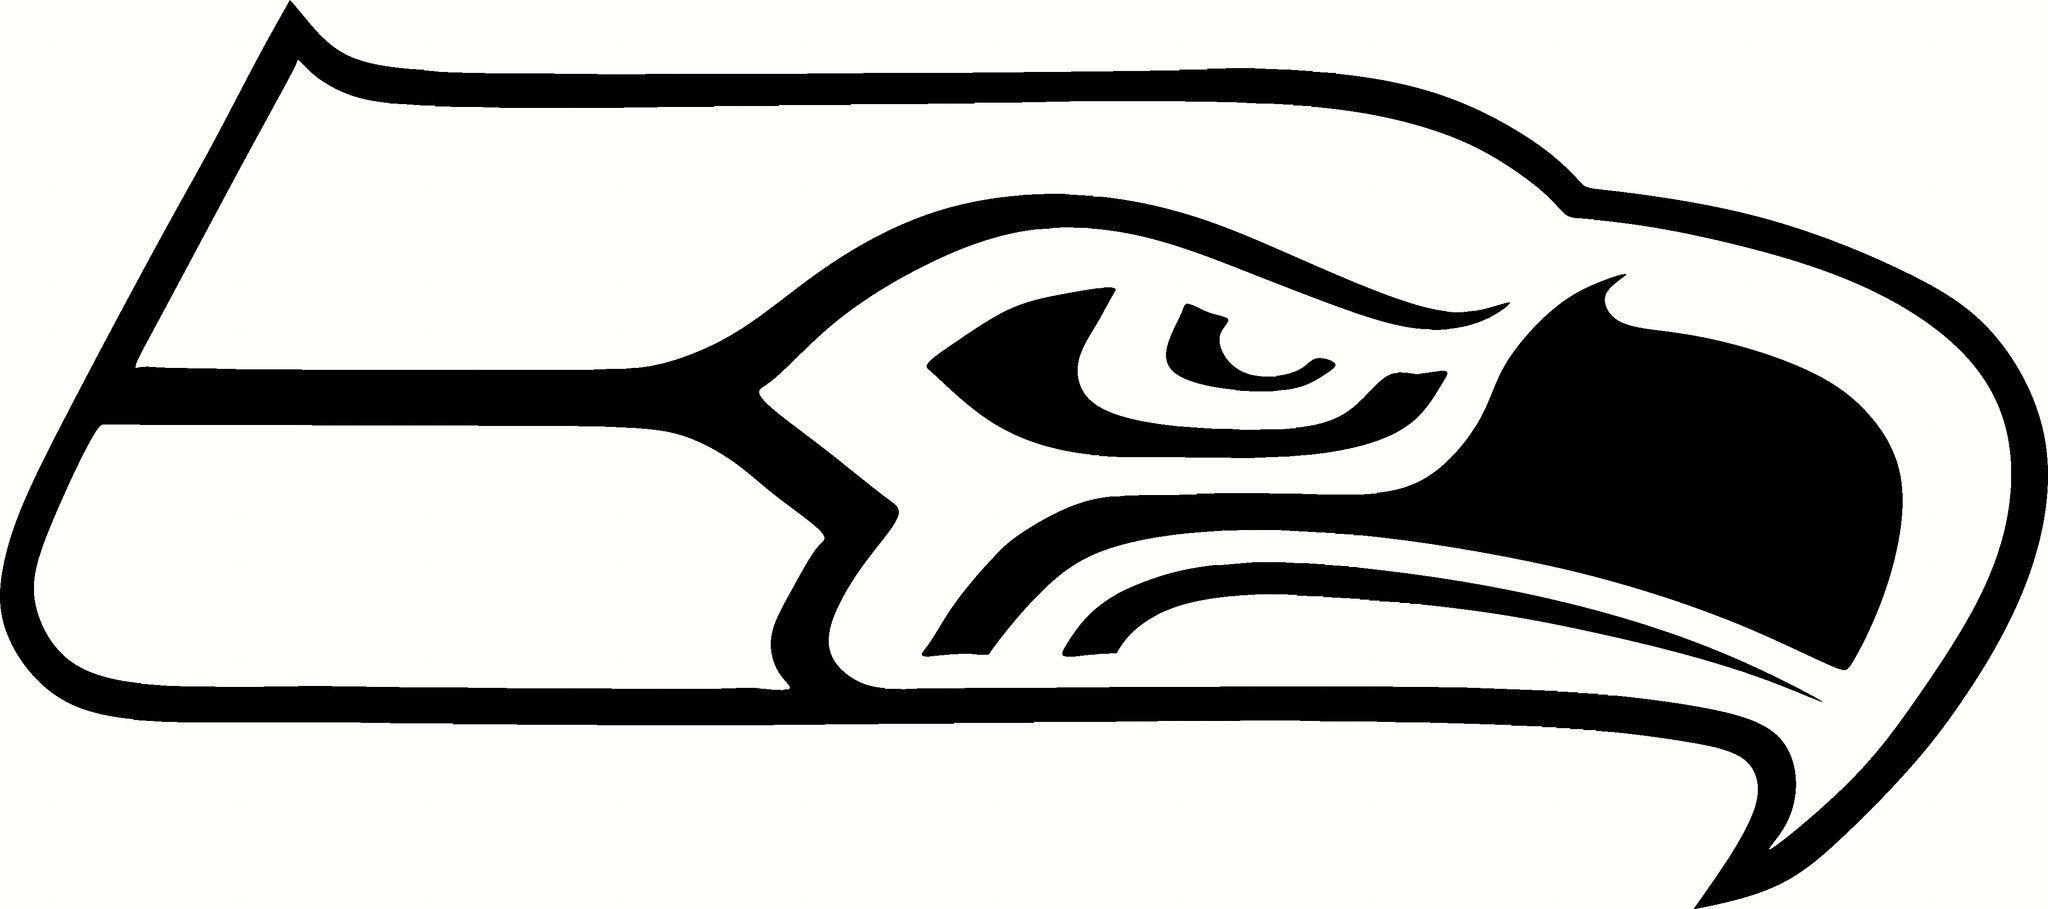 Black and White Seahawks Logo - Seattle Seahawks LOGO Vinyl Cut Out Decal your Color